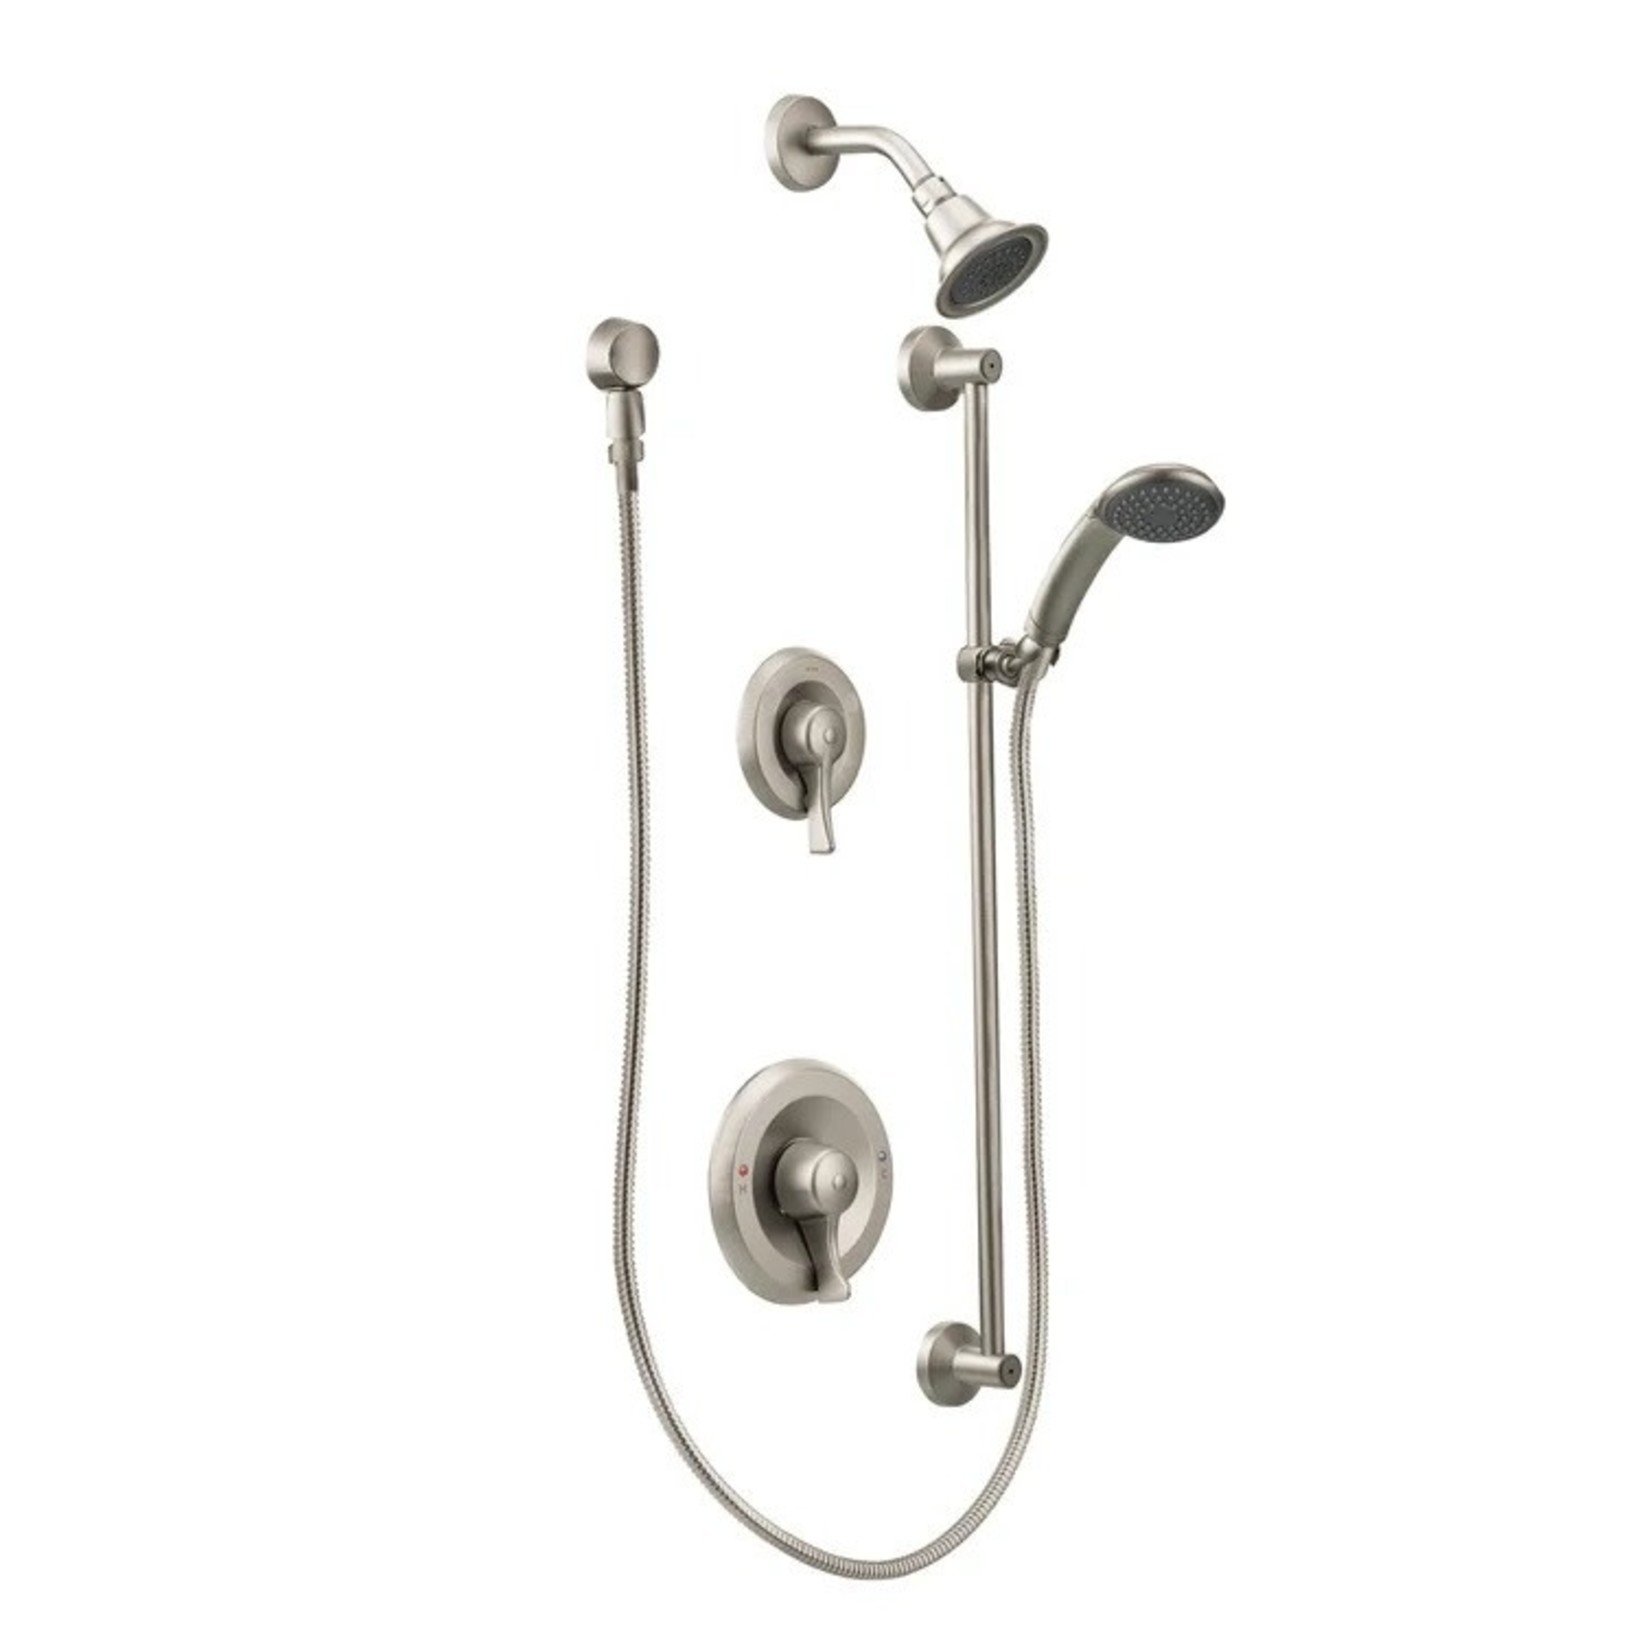 *Moen Commercial Pressure Balanced Shower System - Classic Brushed  Nickel